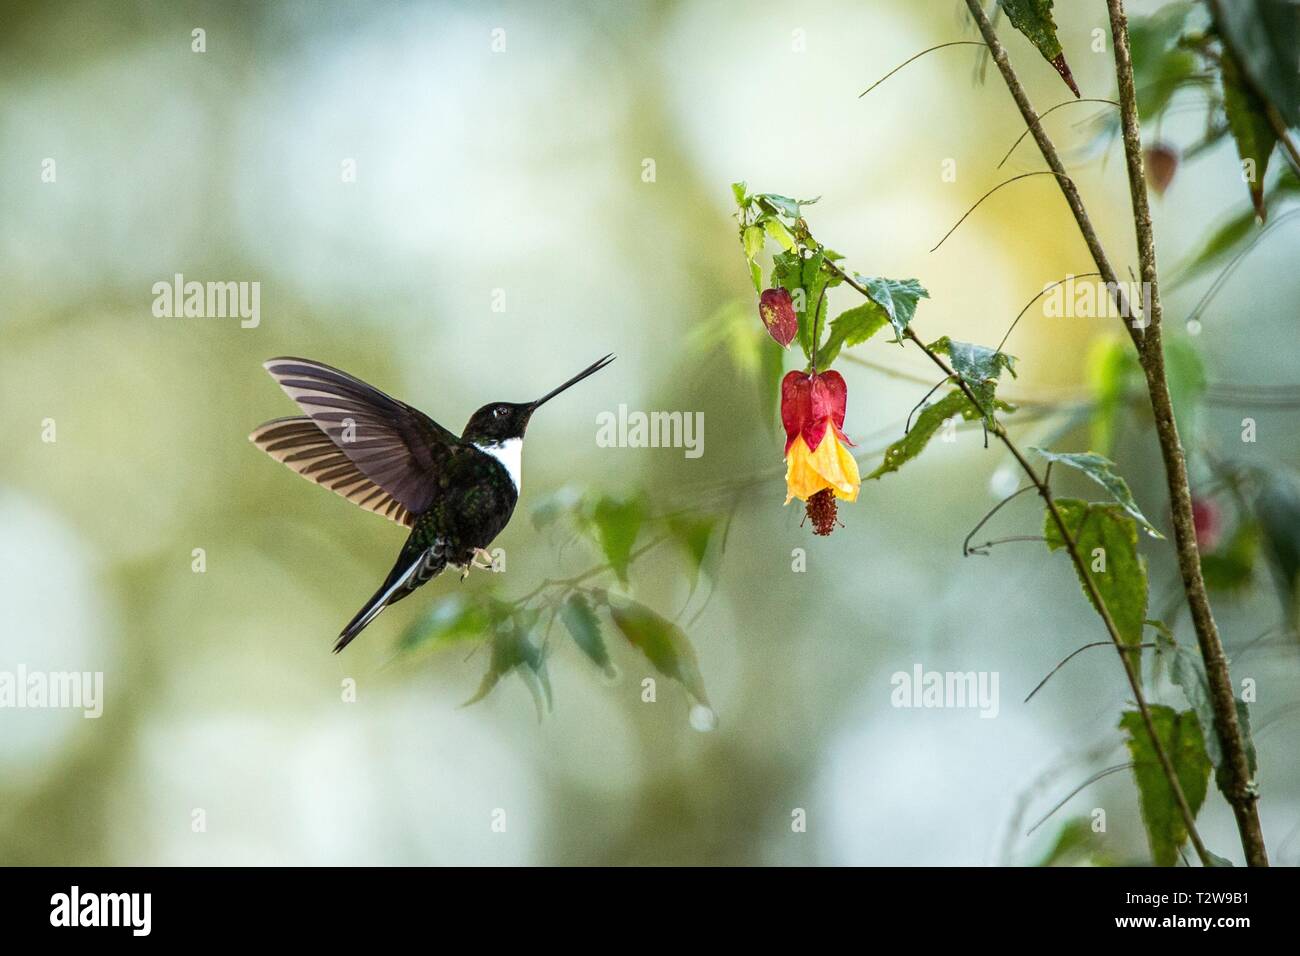 Colared inca howering next to yellow and orange flower, Colombia hummingbird with outstretched wings,hummingbird sucking nectar from blossom,animal in Stock Photo